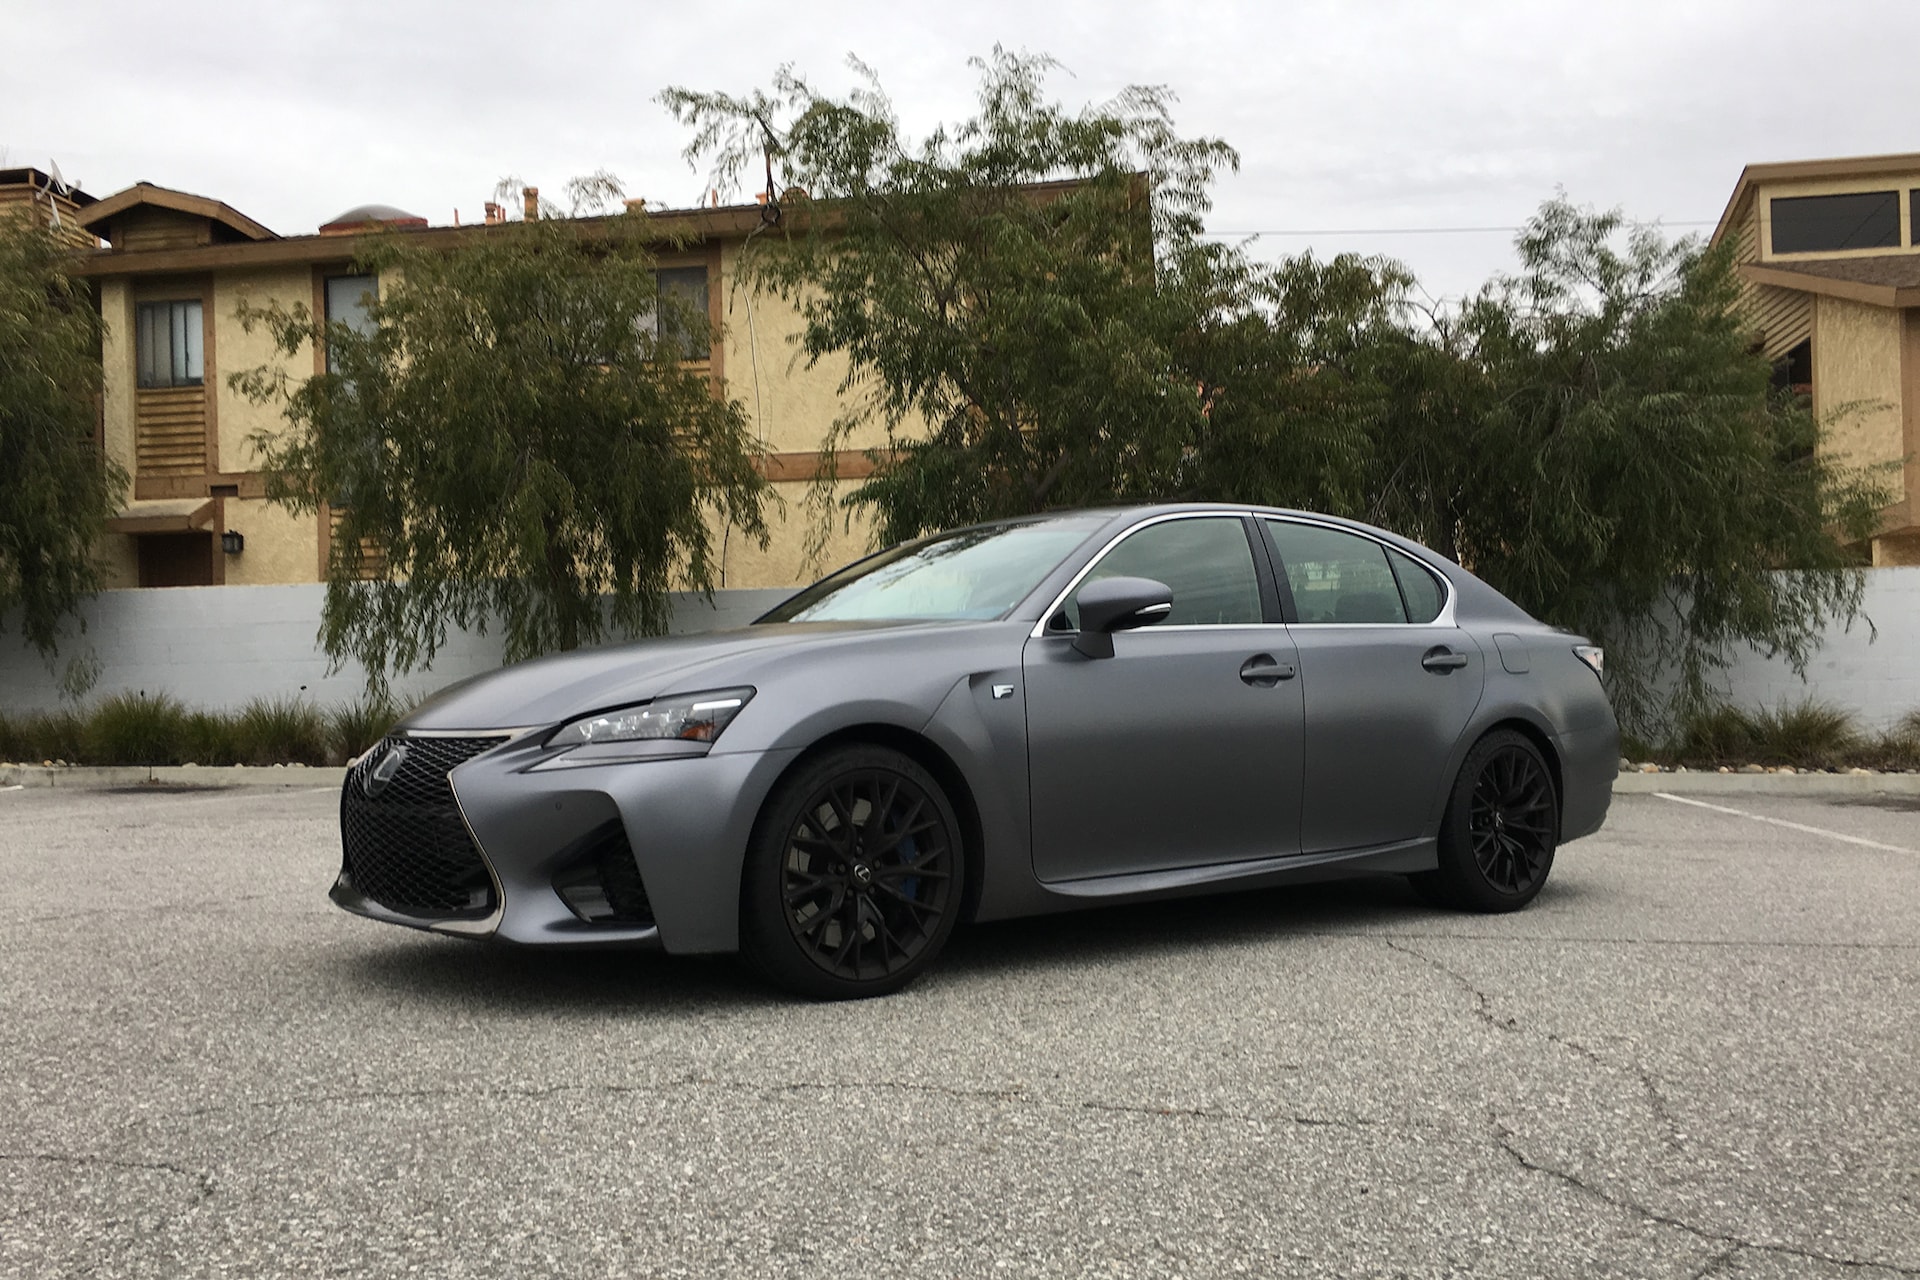 The Lexus GS F Is Delightfully Anachronistic